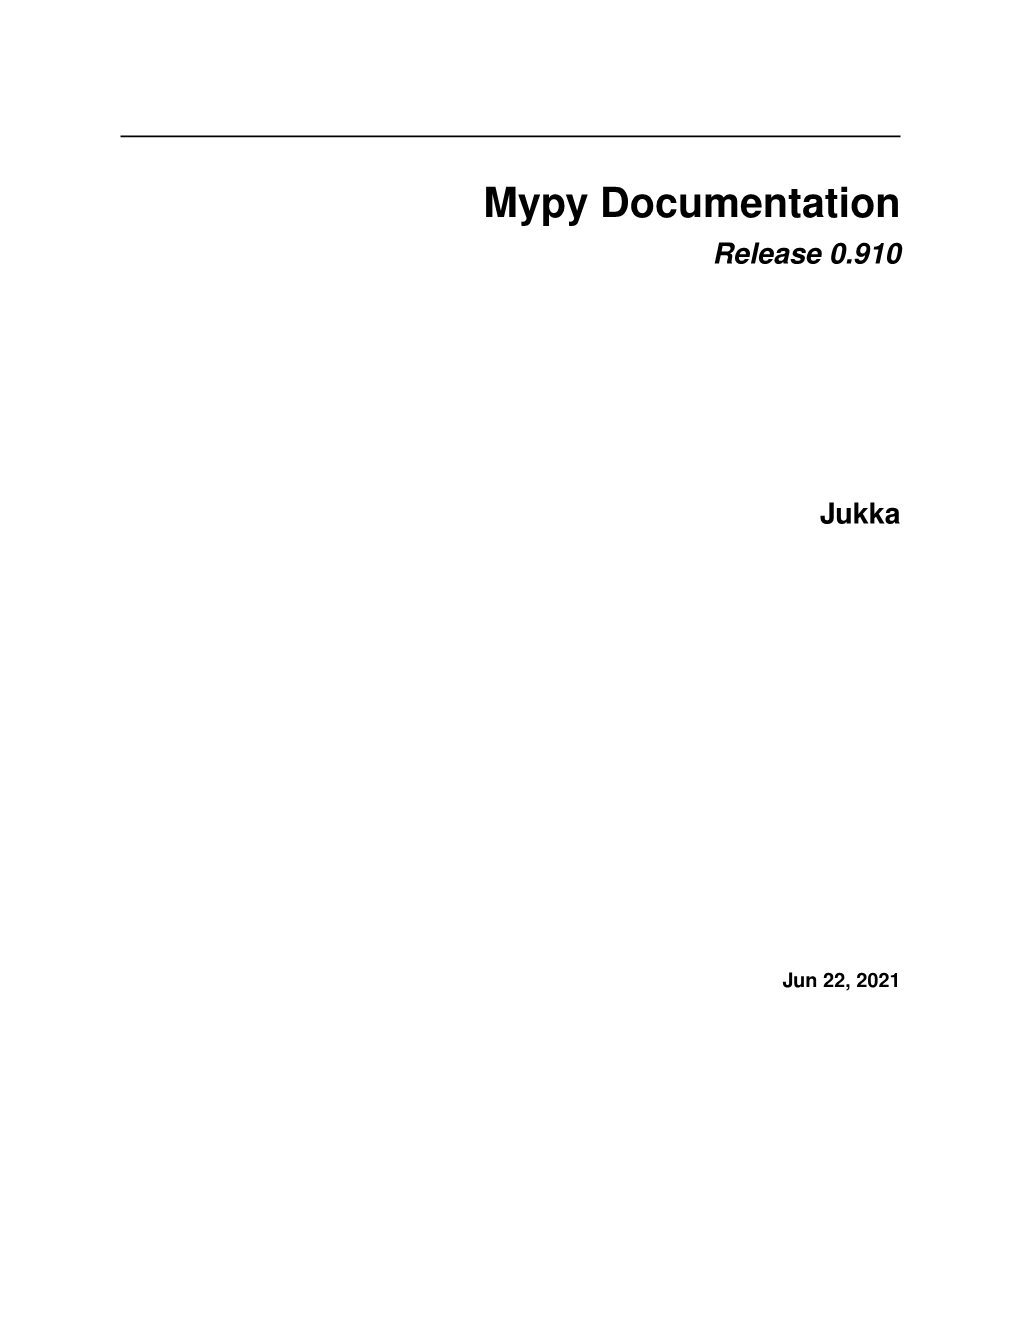 Mypy Documentation Release 0.910